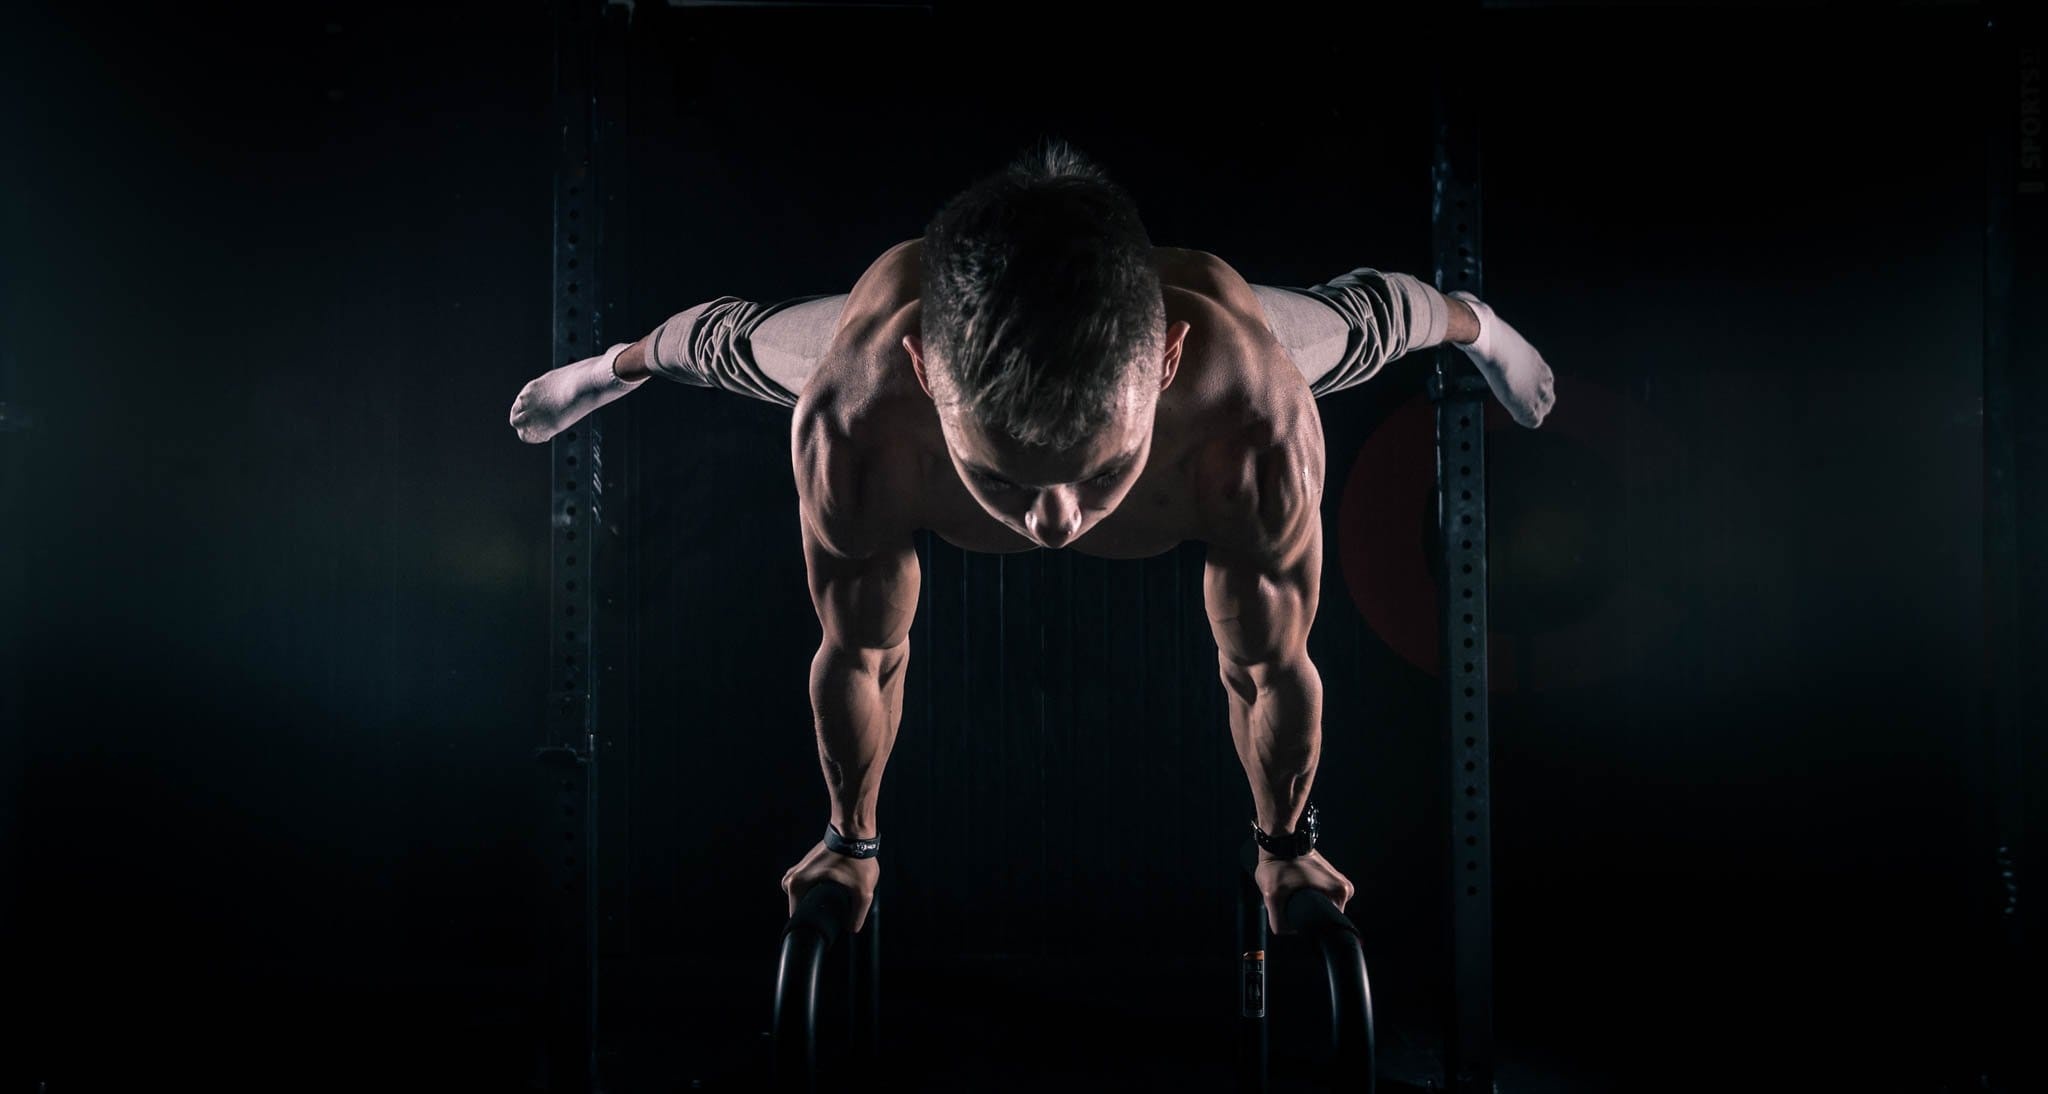 Calisthenics: An advanced strength exercise, A combo planche-push-up exercise performed by a professional gymnast. 2050x1100 HD Background.